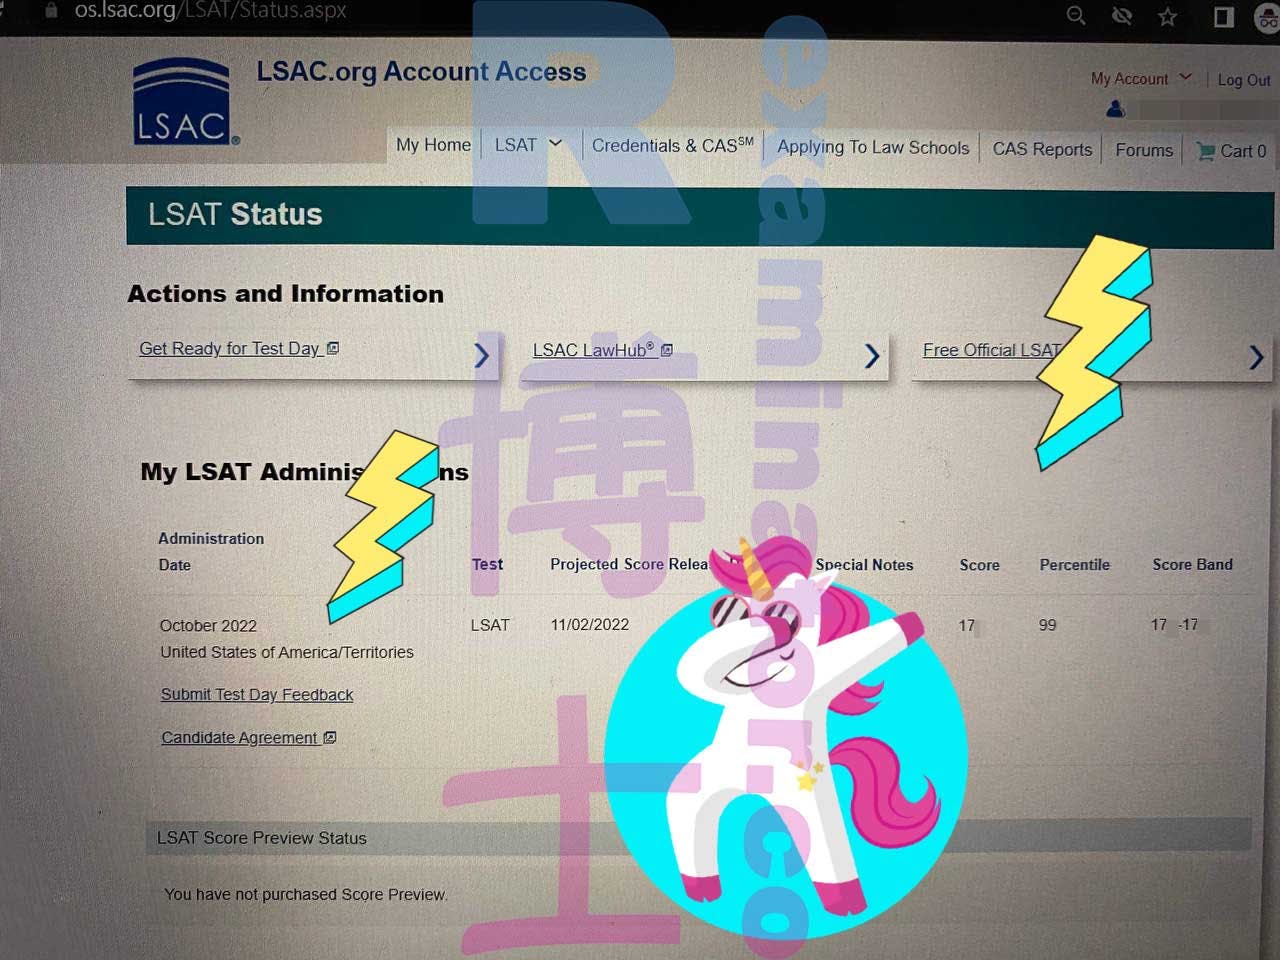 (Chinese)17X on Oct LSAT!! The customer was awaiting his LSAT score on a yacht🍹🛥